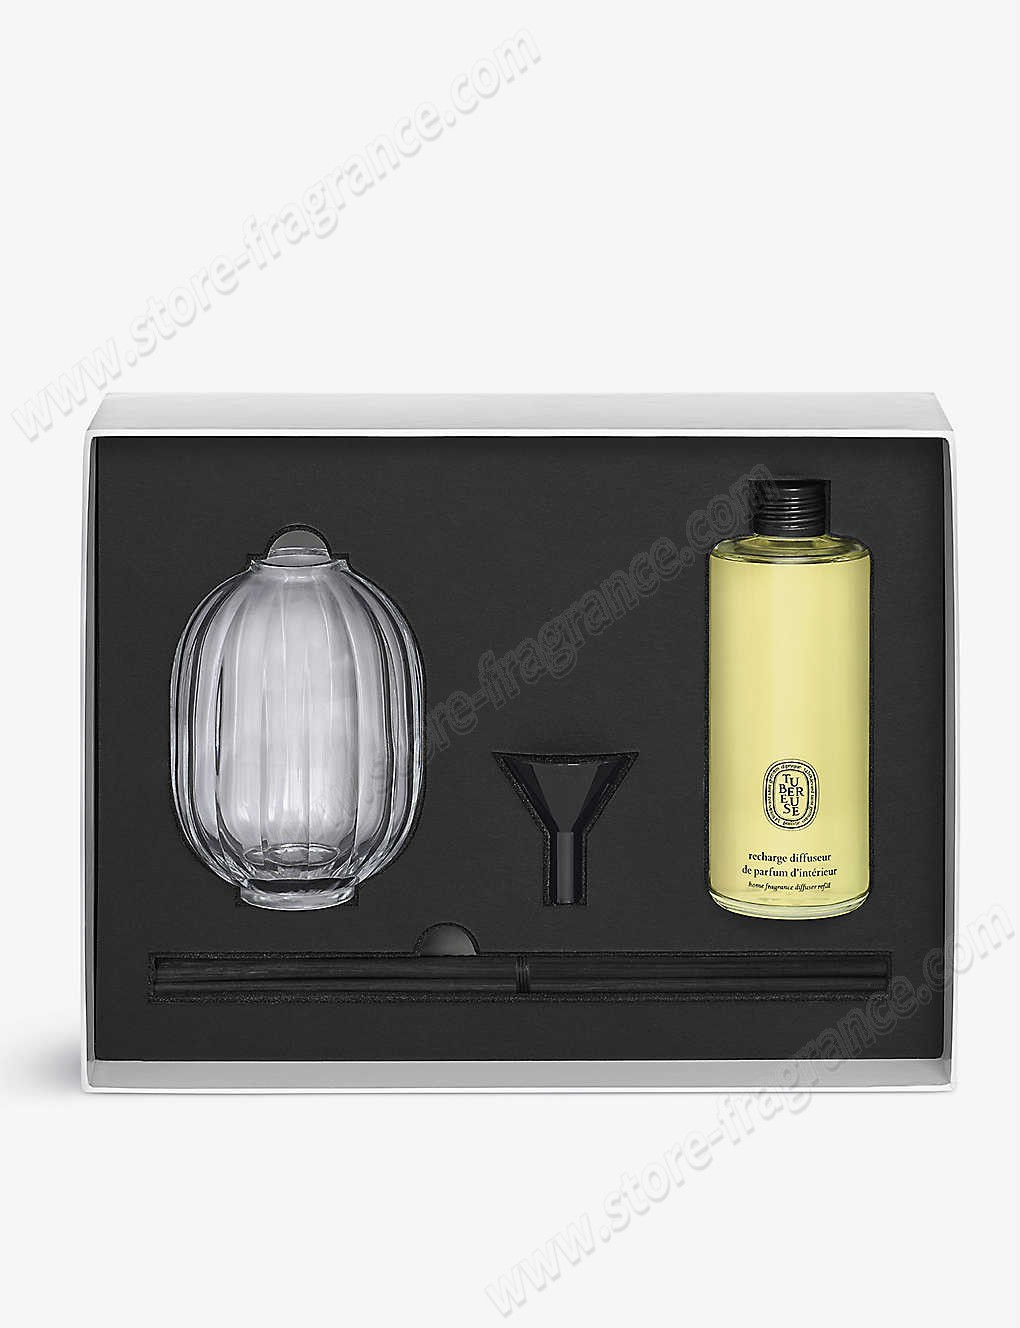 DIPTYQUE/Tubereuse reed diffuser and refill set 200ml Limit Offer - -1